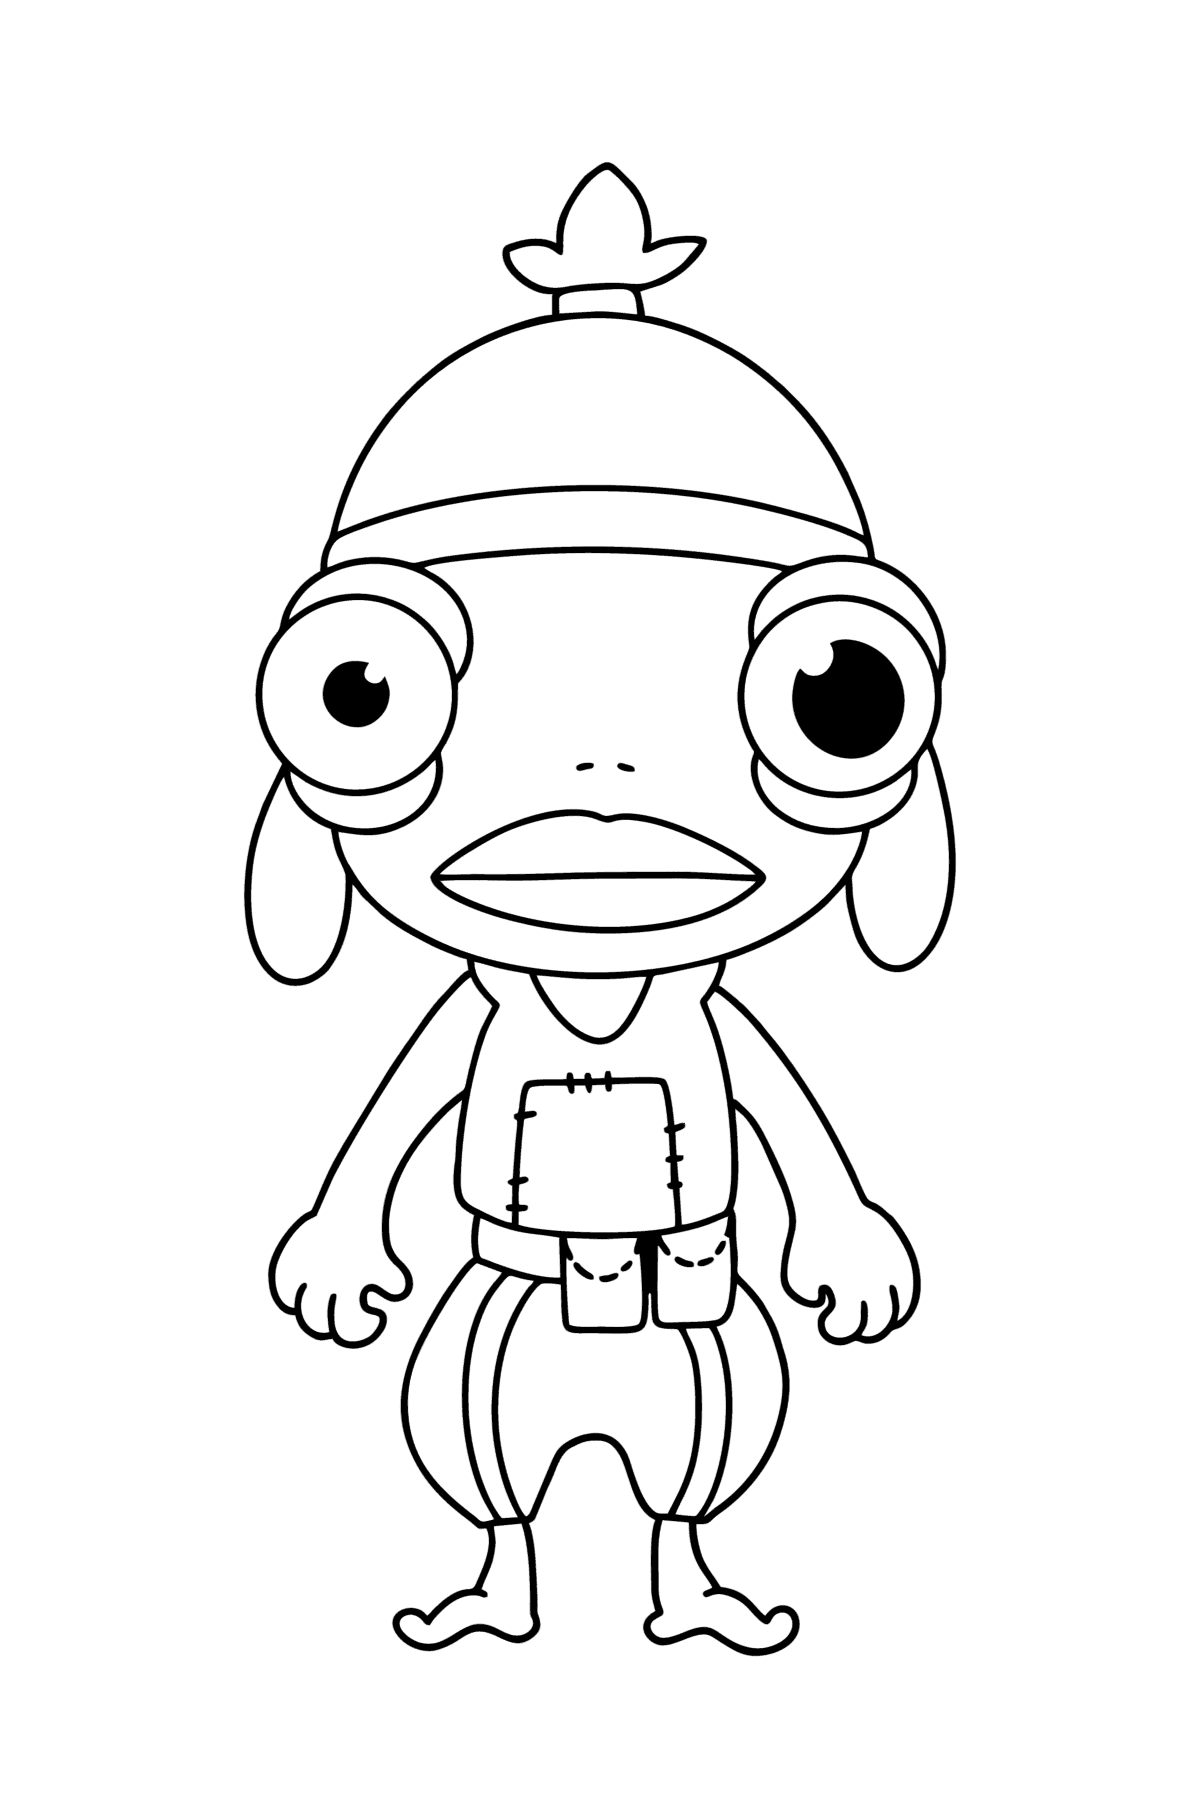 Fortnite Funko POP Fishstick coloring page - Coloring Pages for Kids